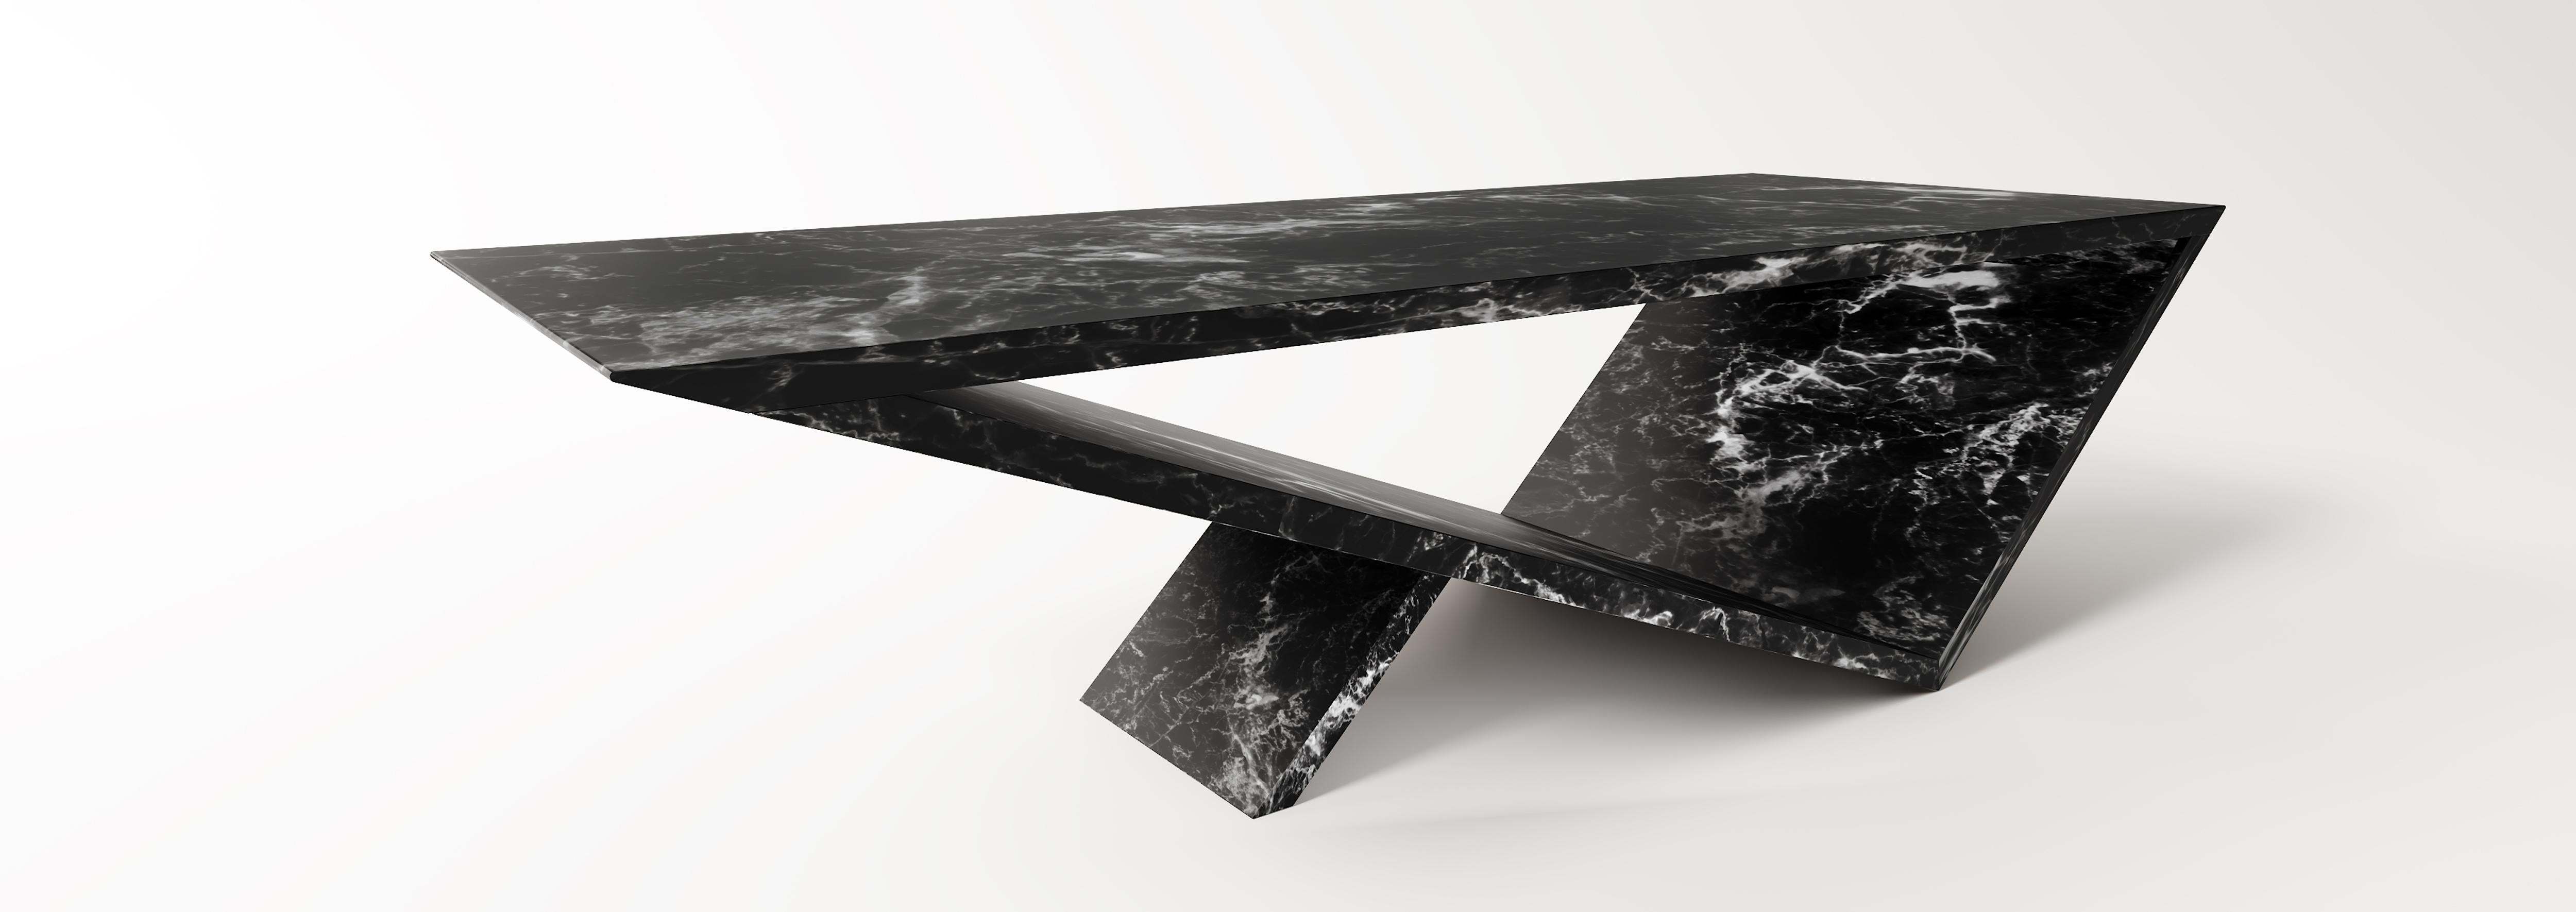 Time/space Portal Coffee Table in Black Marble.

The inspiration for the time/space portal table collection comes from the power, simplicity, and elegance of the triangle.
This is an ongoing series exploring the dynamics of balance, weight, gravity,